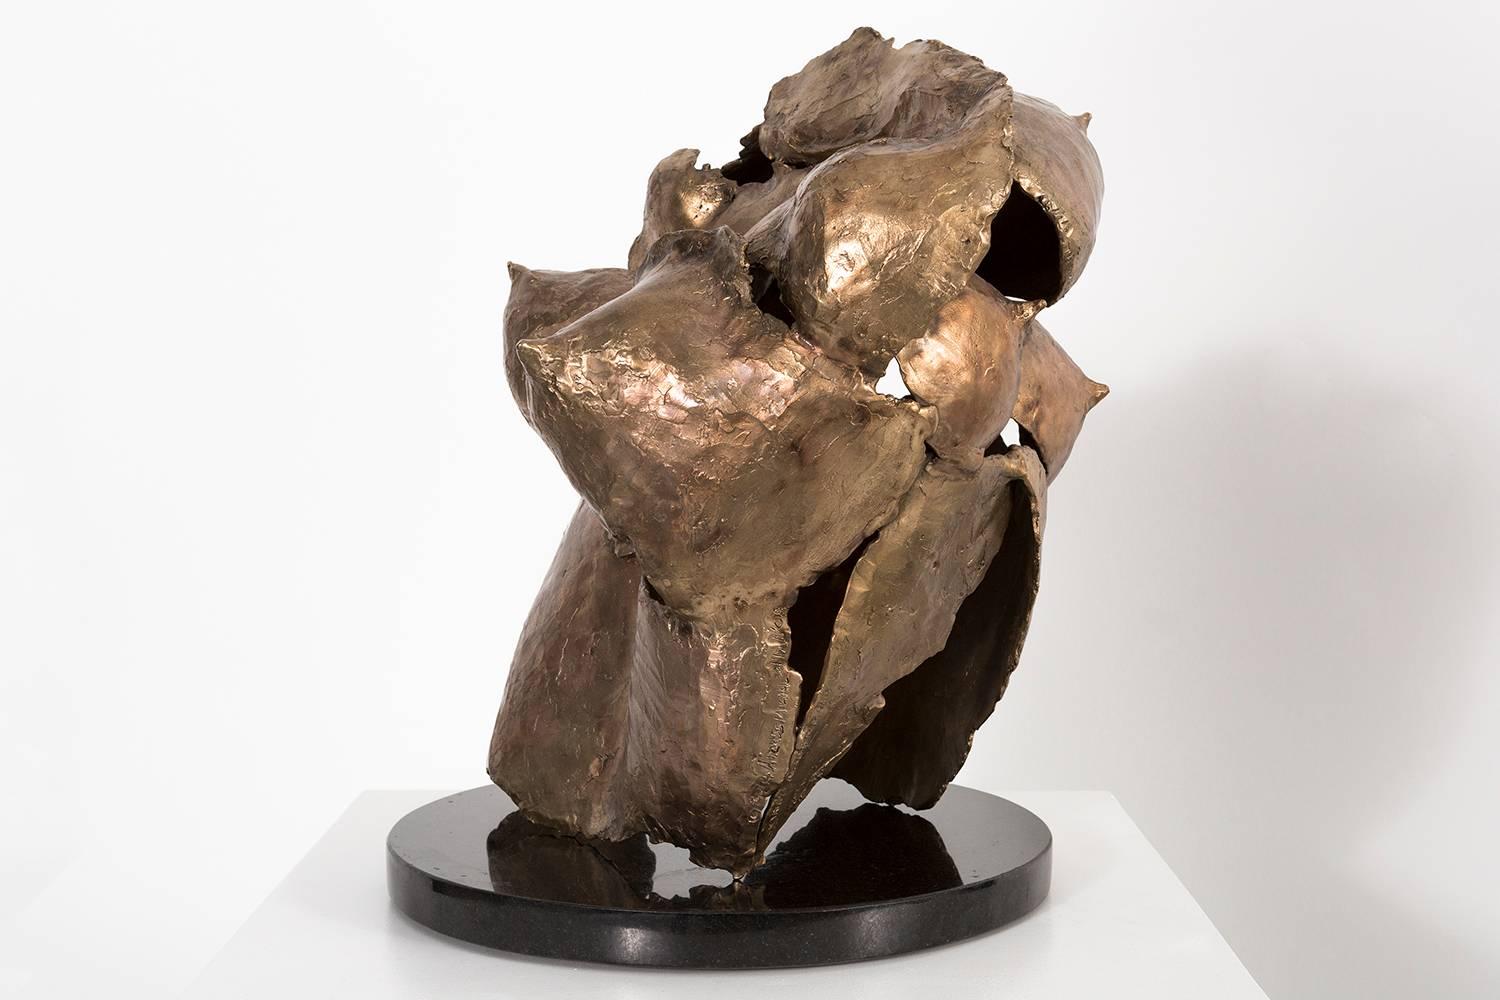 “Melody” is a 2016 bronze sculpture by Ruth AIzuss Migdal. Gorgeously complex from all angles, “Melody” is an abstract depiction of a female torso.

Through a puzzle-like assembly of pieces, Ruth Aizuss Migdal builds layers and organic contours that